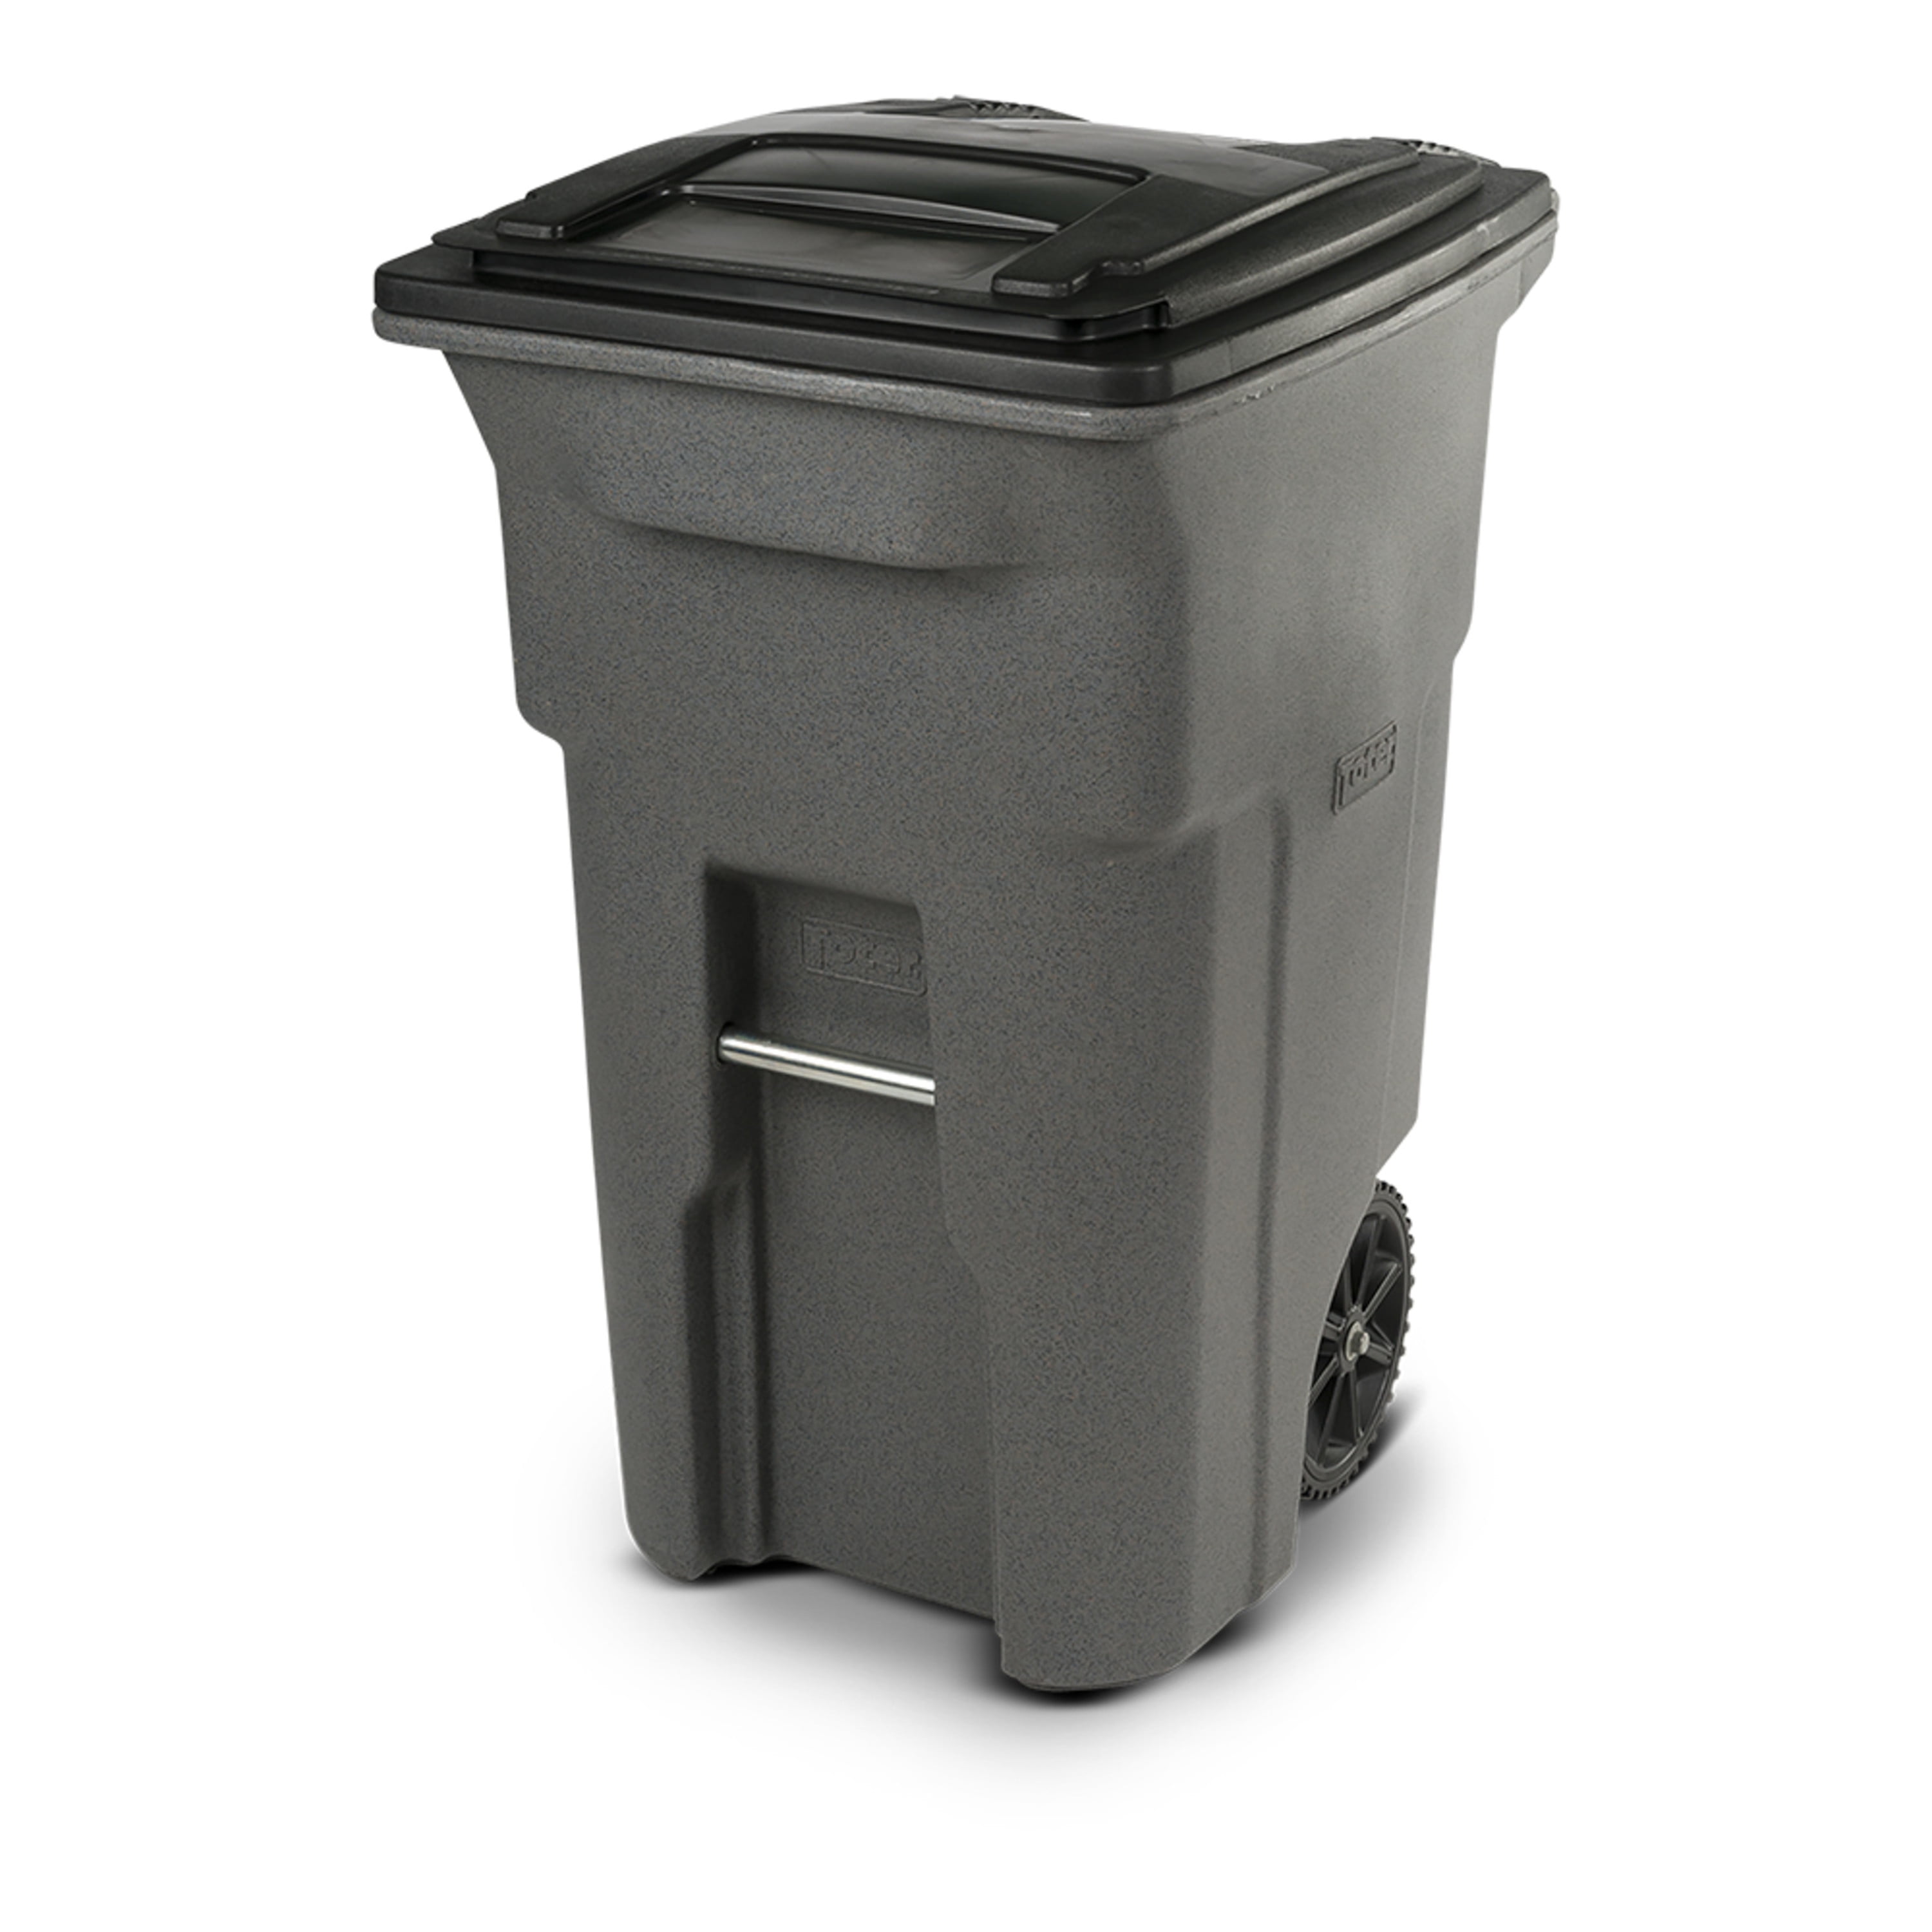 Graystone Toter Open Top Lid for 23-Gallon Rectangular Slimline Trash Can